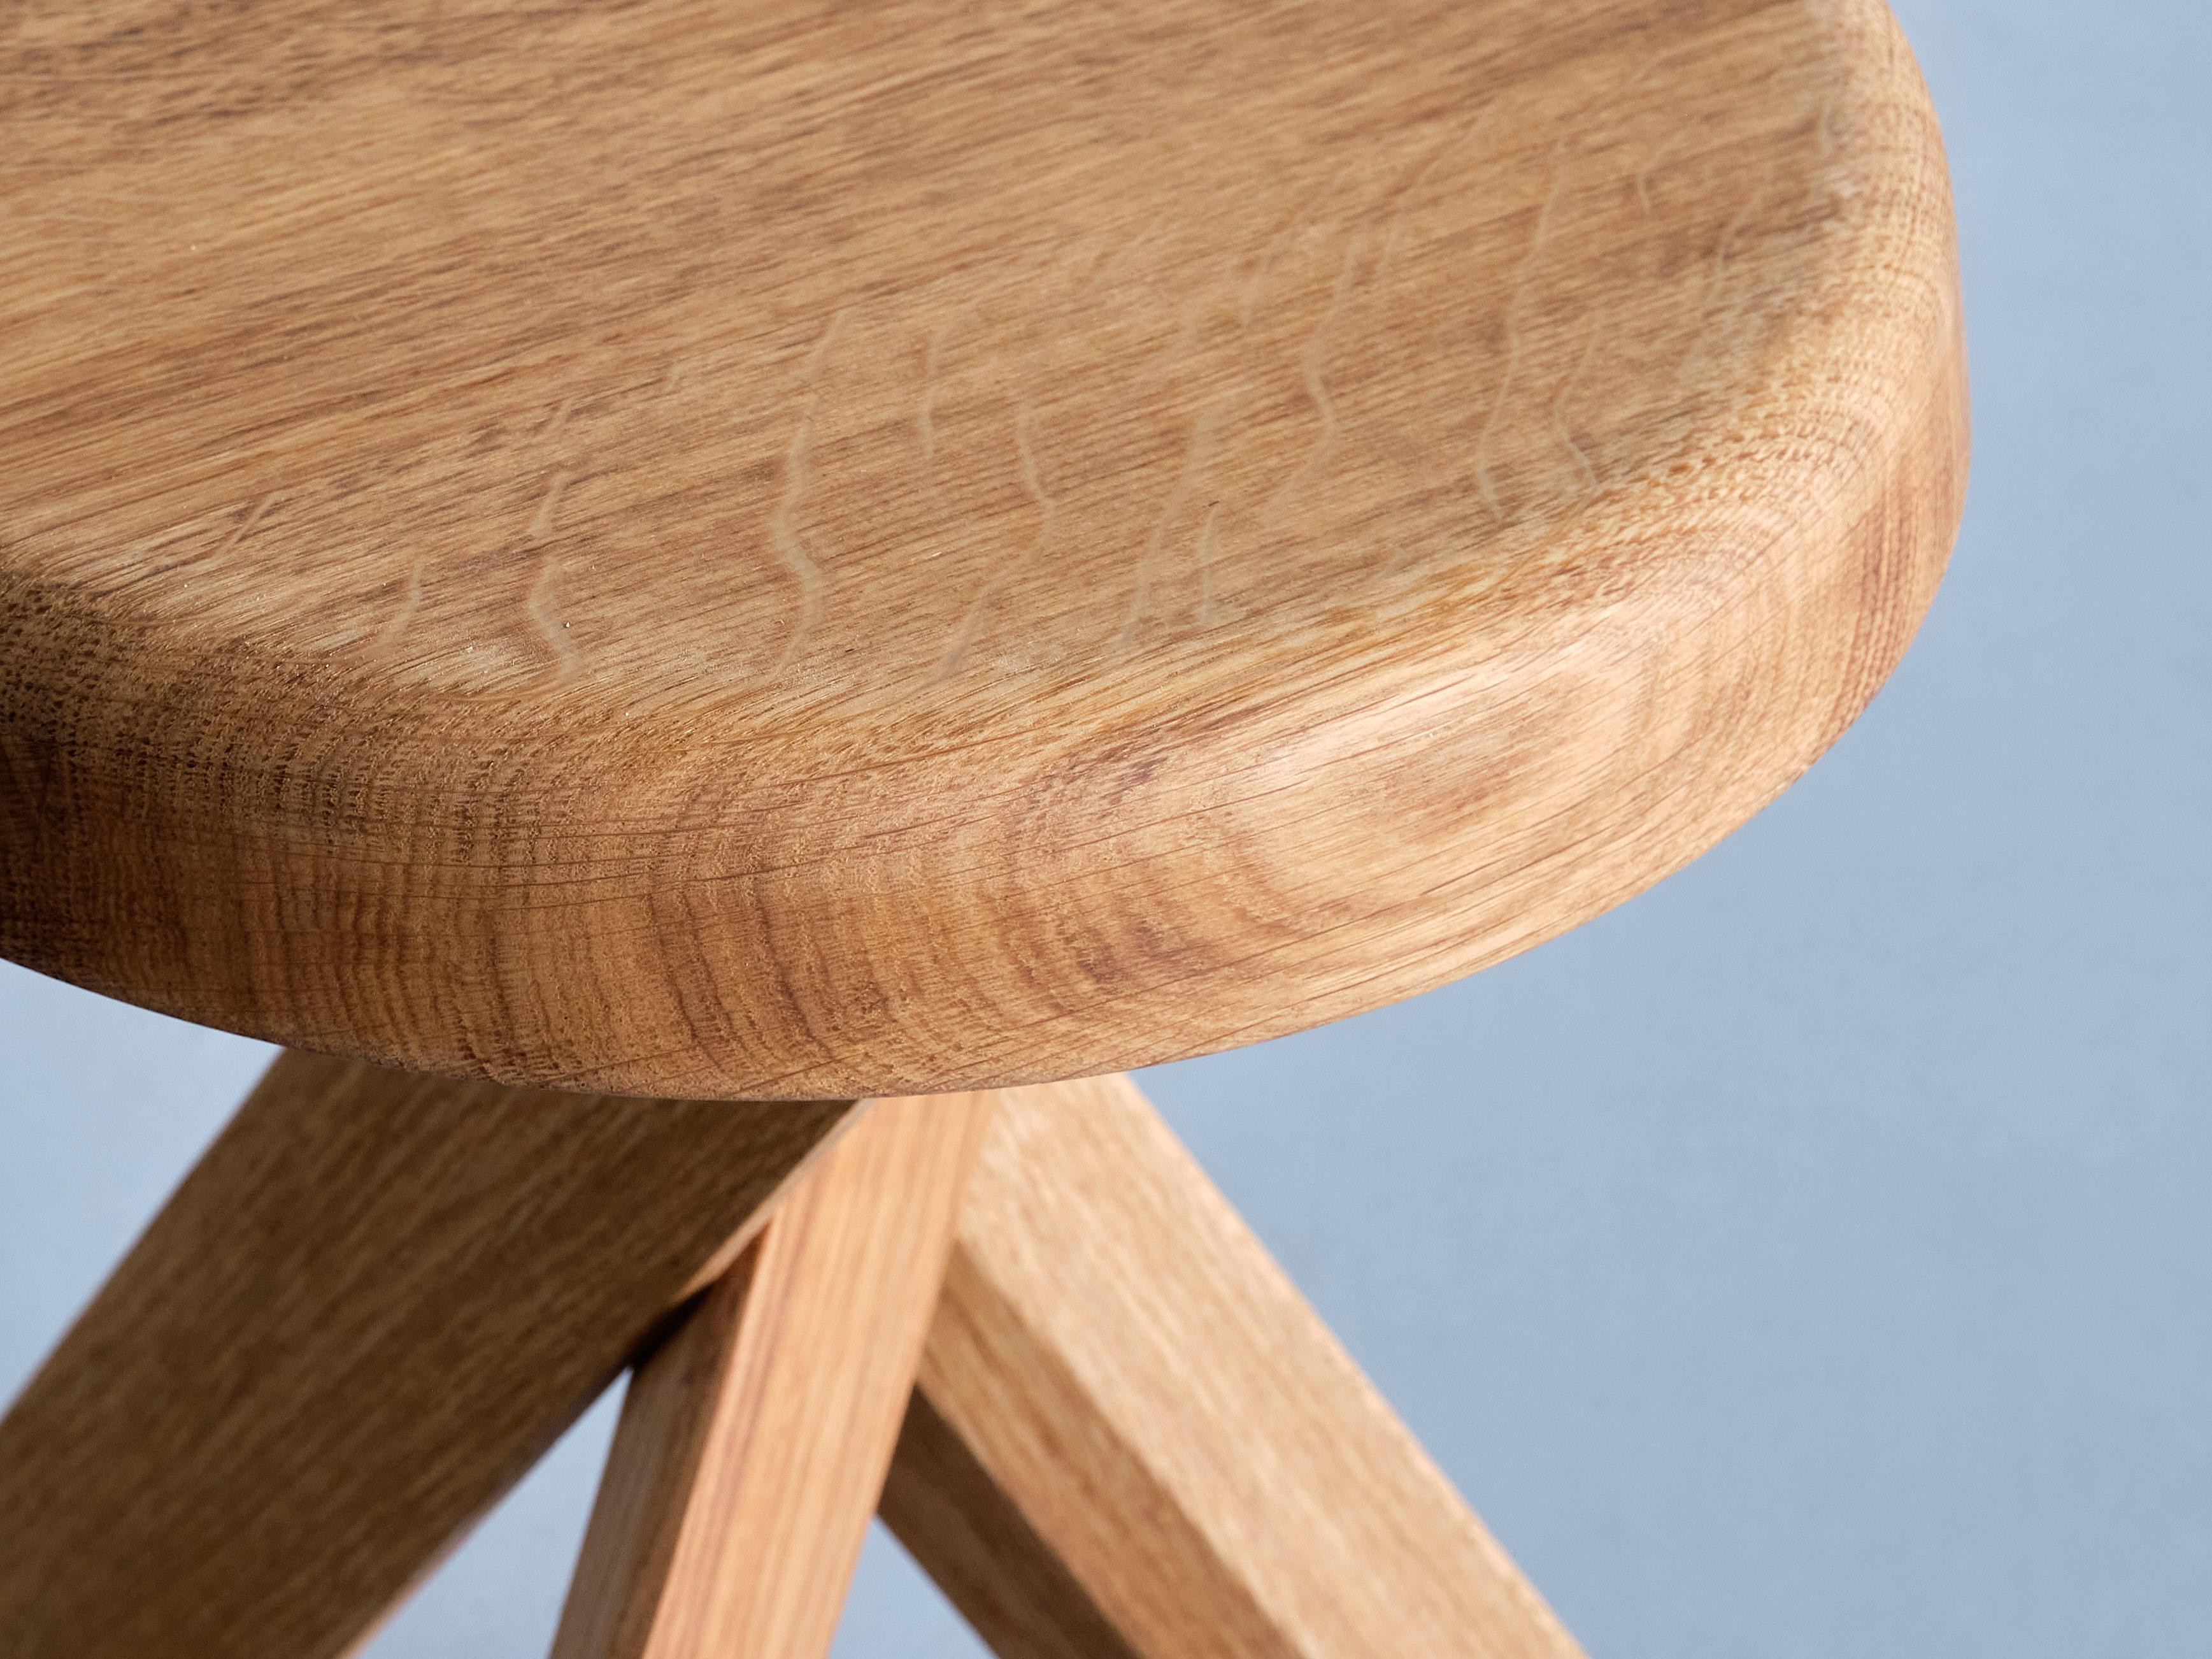 Pierre Chapo S31A Stool in Solid Oak Wood, Chapo Creation, France For Sale 2